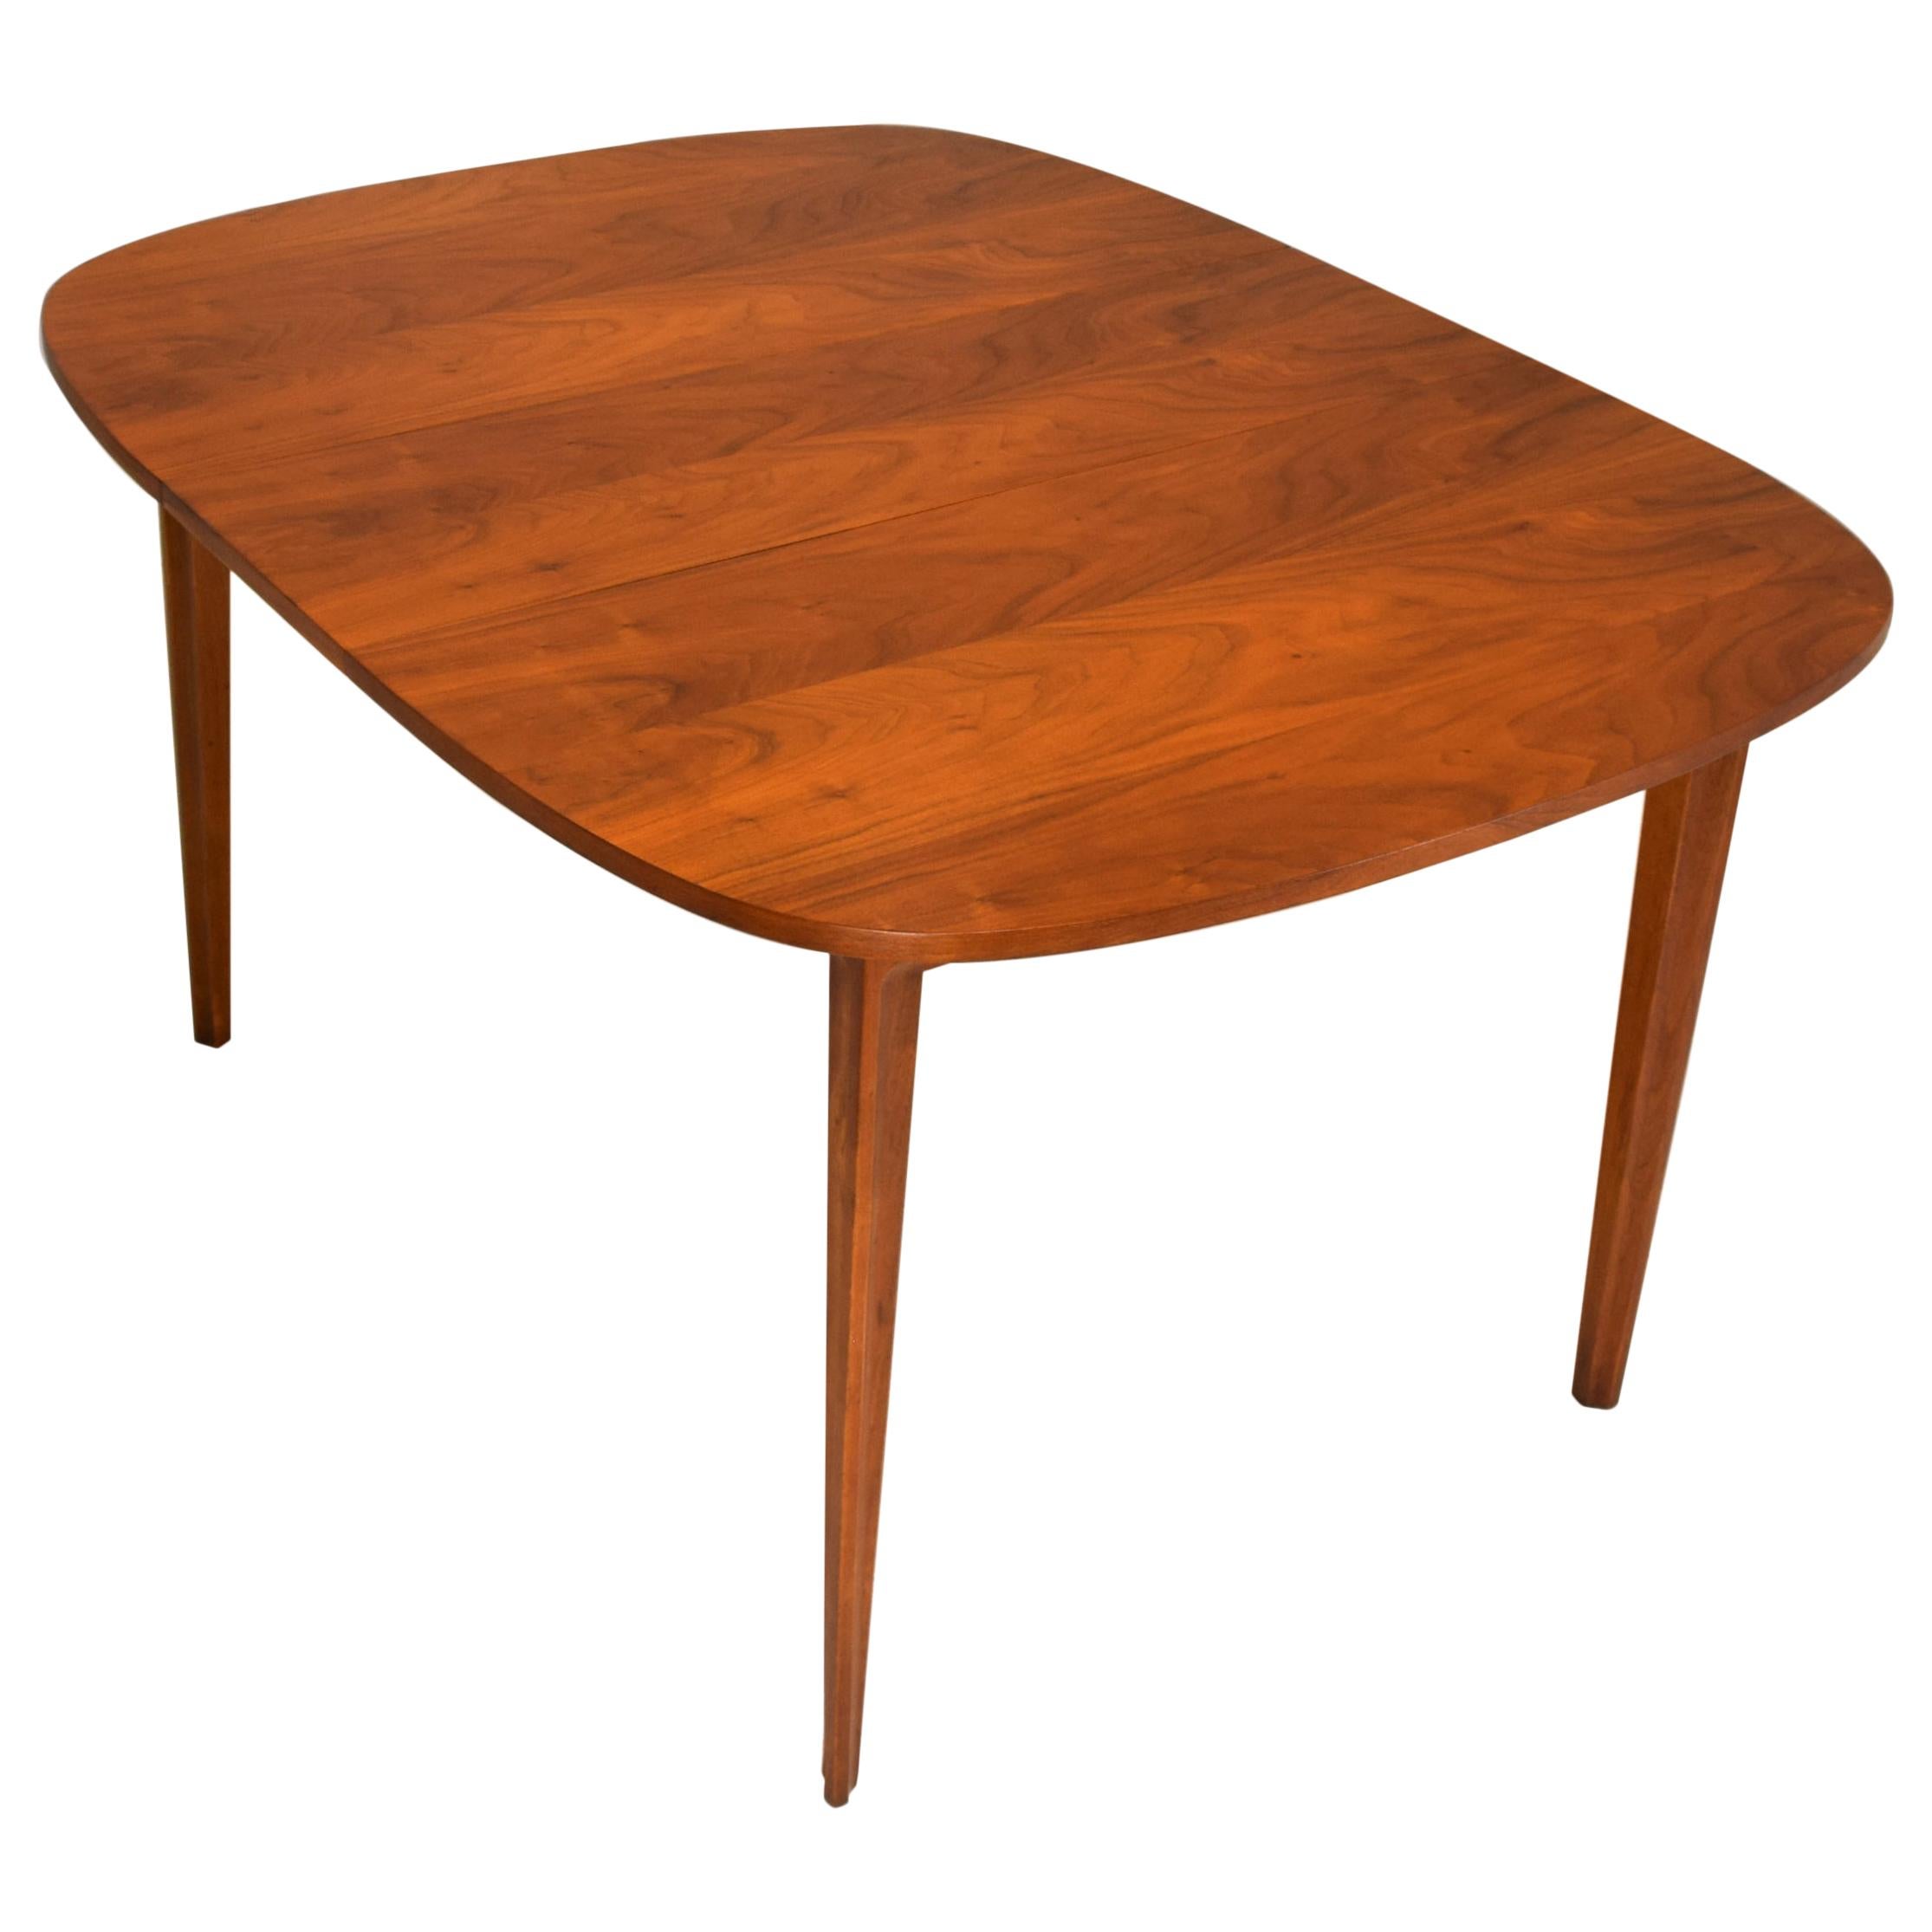 Broyhill Walnut Dining Table with One Leaf